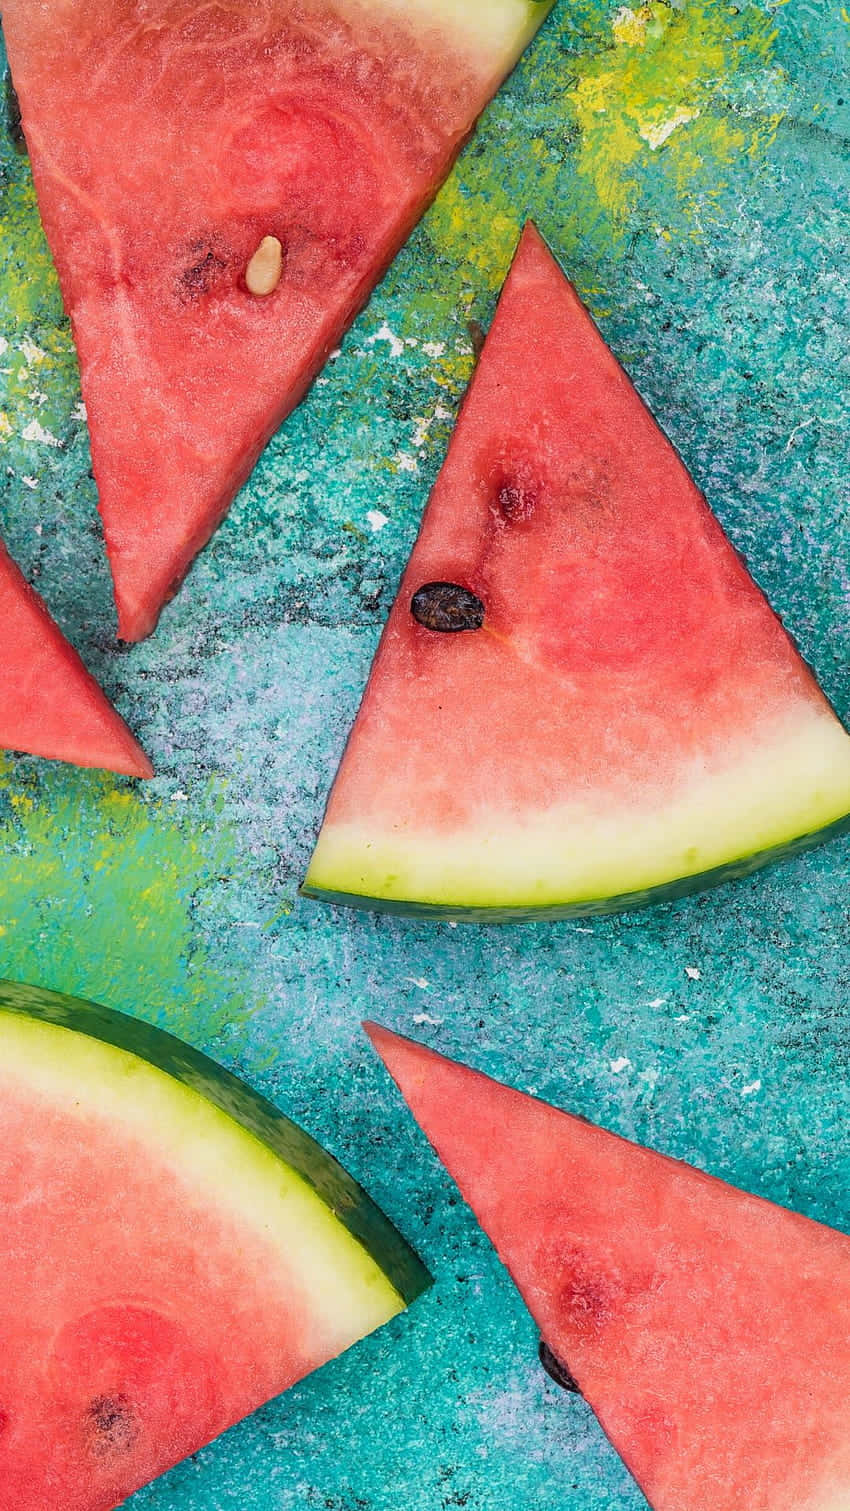 Check Out This Delicious Watermelon iPhone Wallpaper